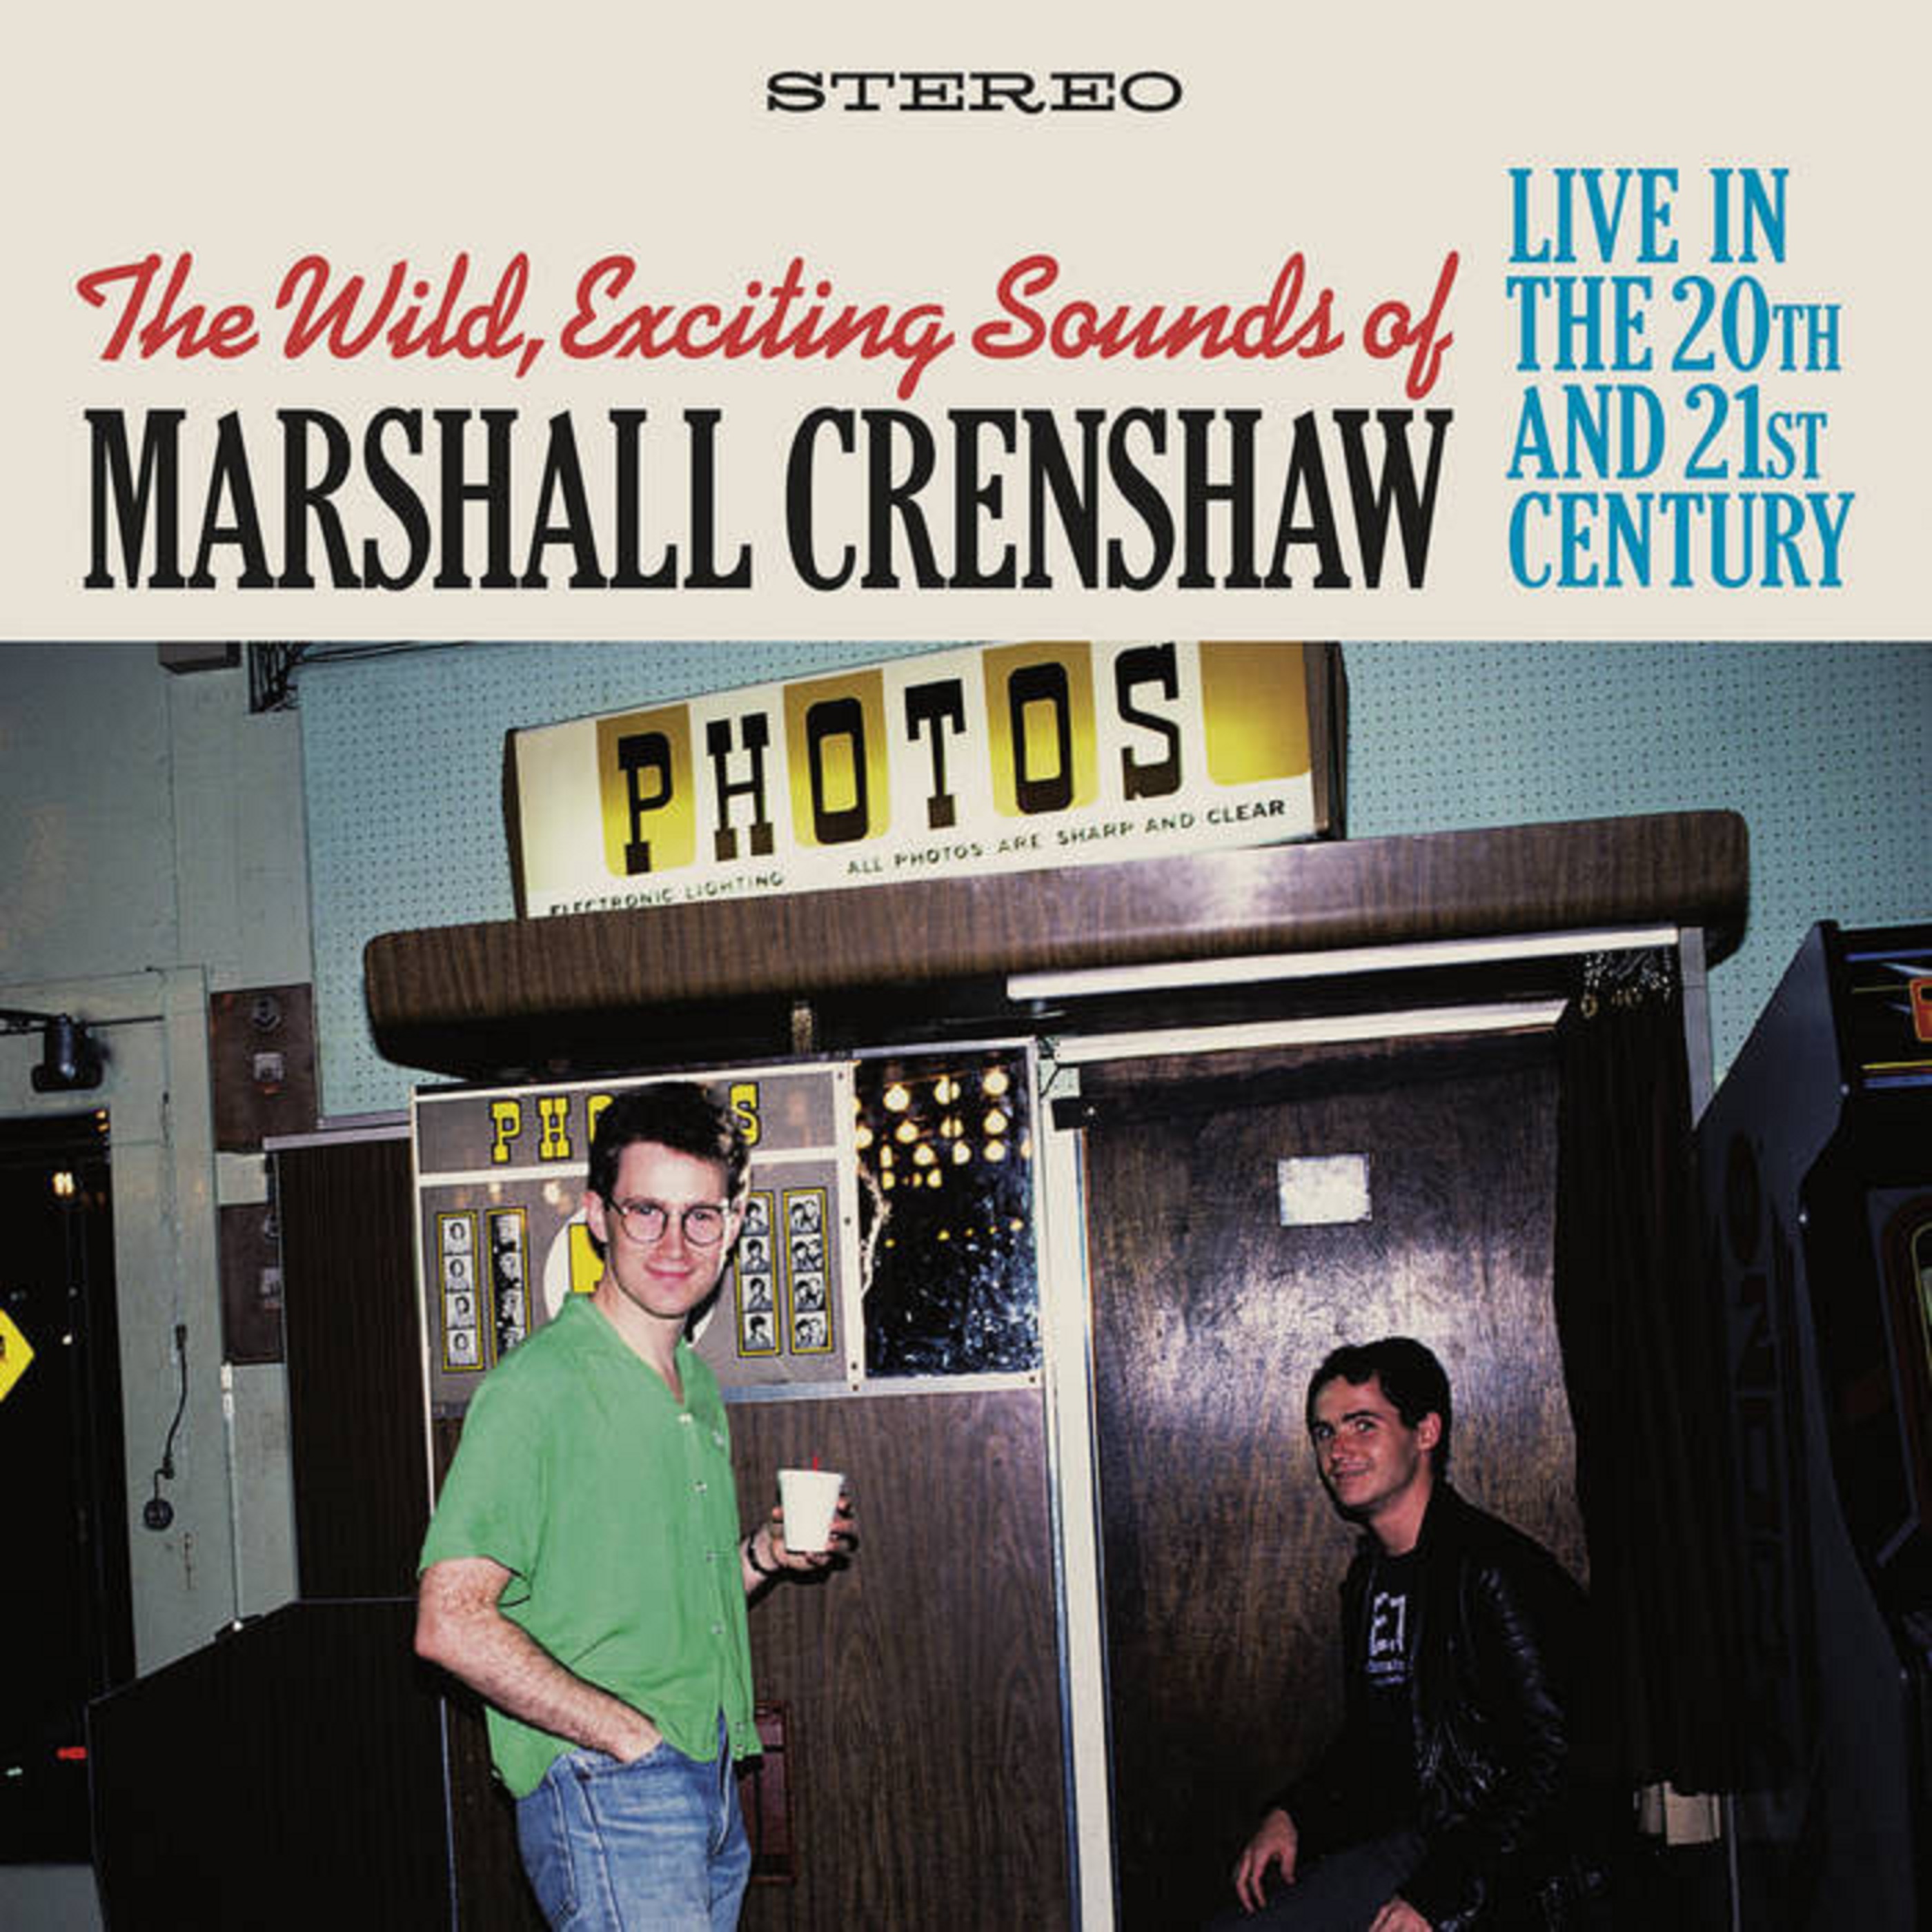 Marshall Crenshaw Historical Release Out August 27